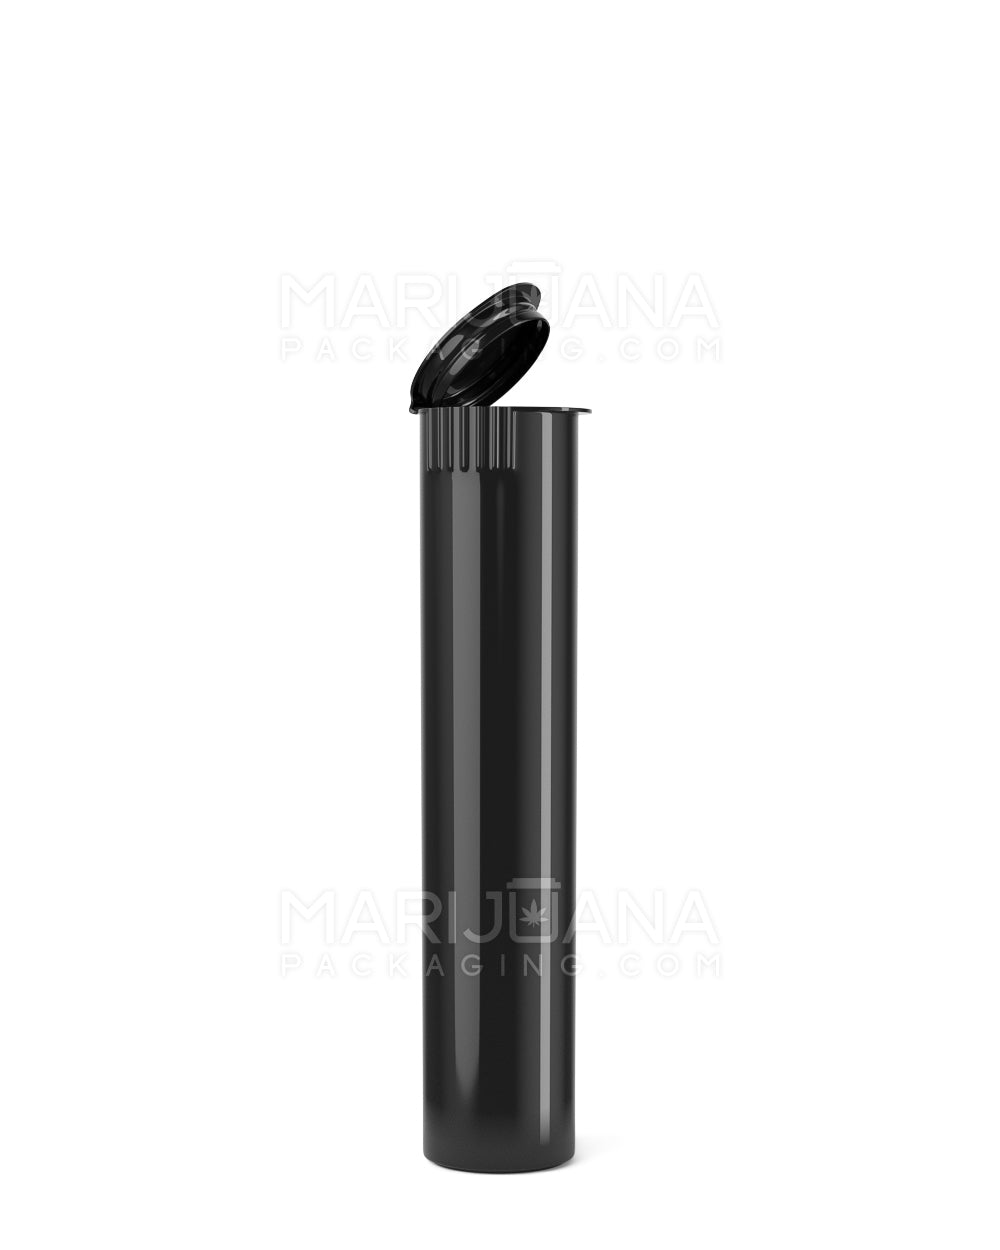 90mm Select Line Pre-Roll Tubes - Black - Child Resistant Made in